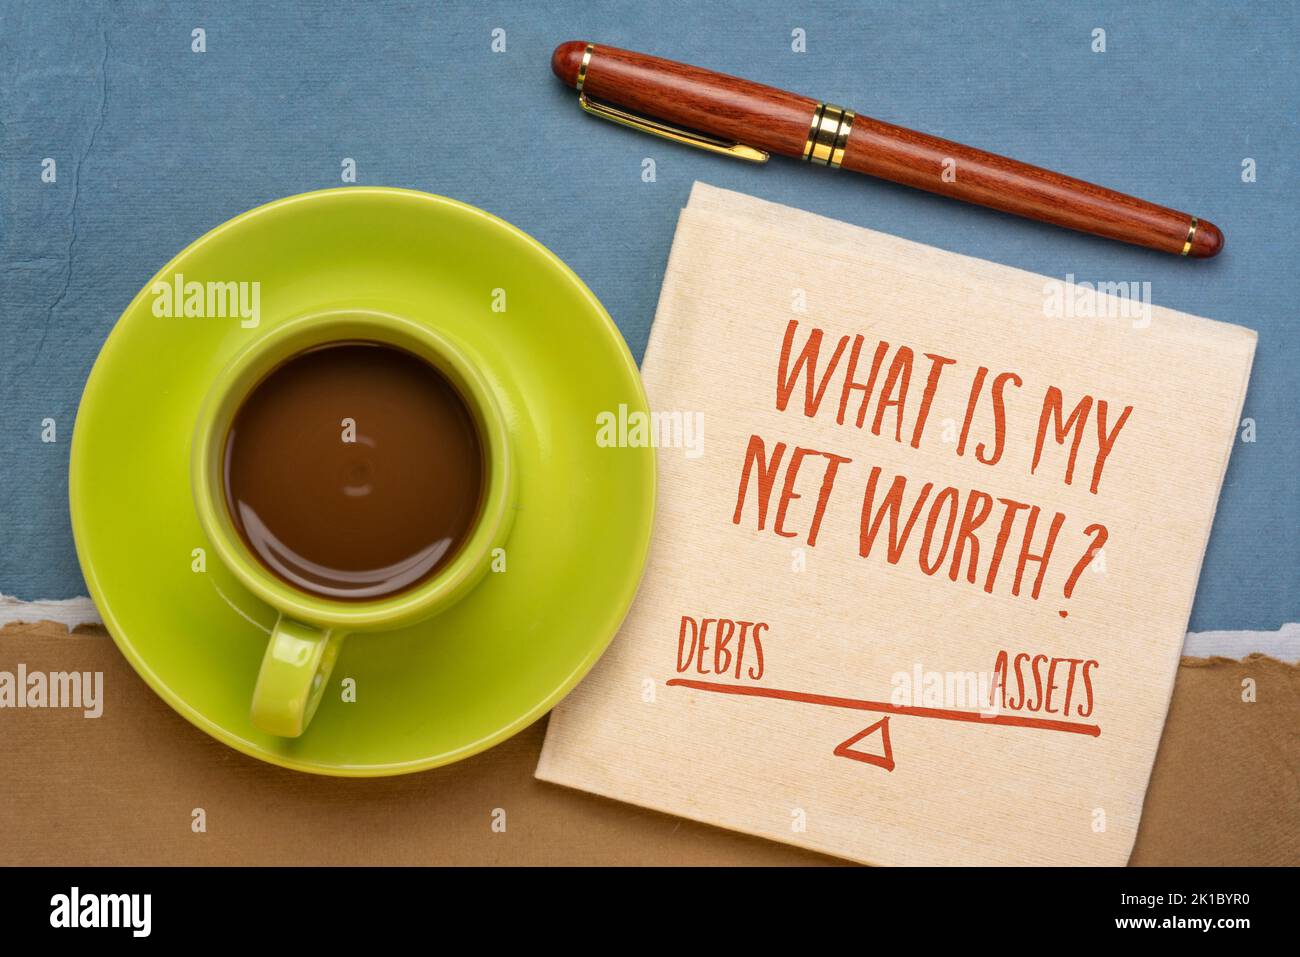 What is my net worth? Handwriting and sketch on a napkin with a cup of coffee. Debts, assets and financial concept. Stock Photo